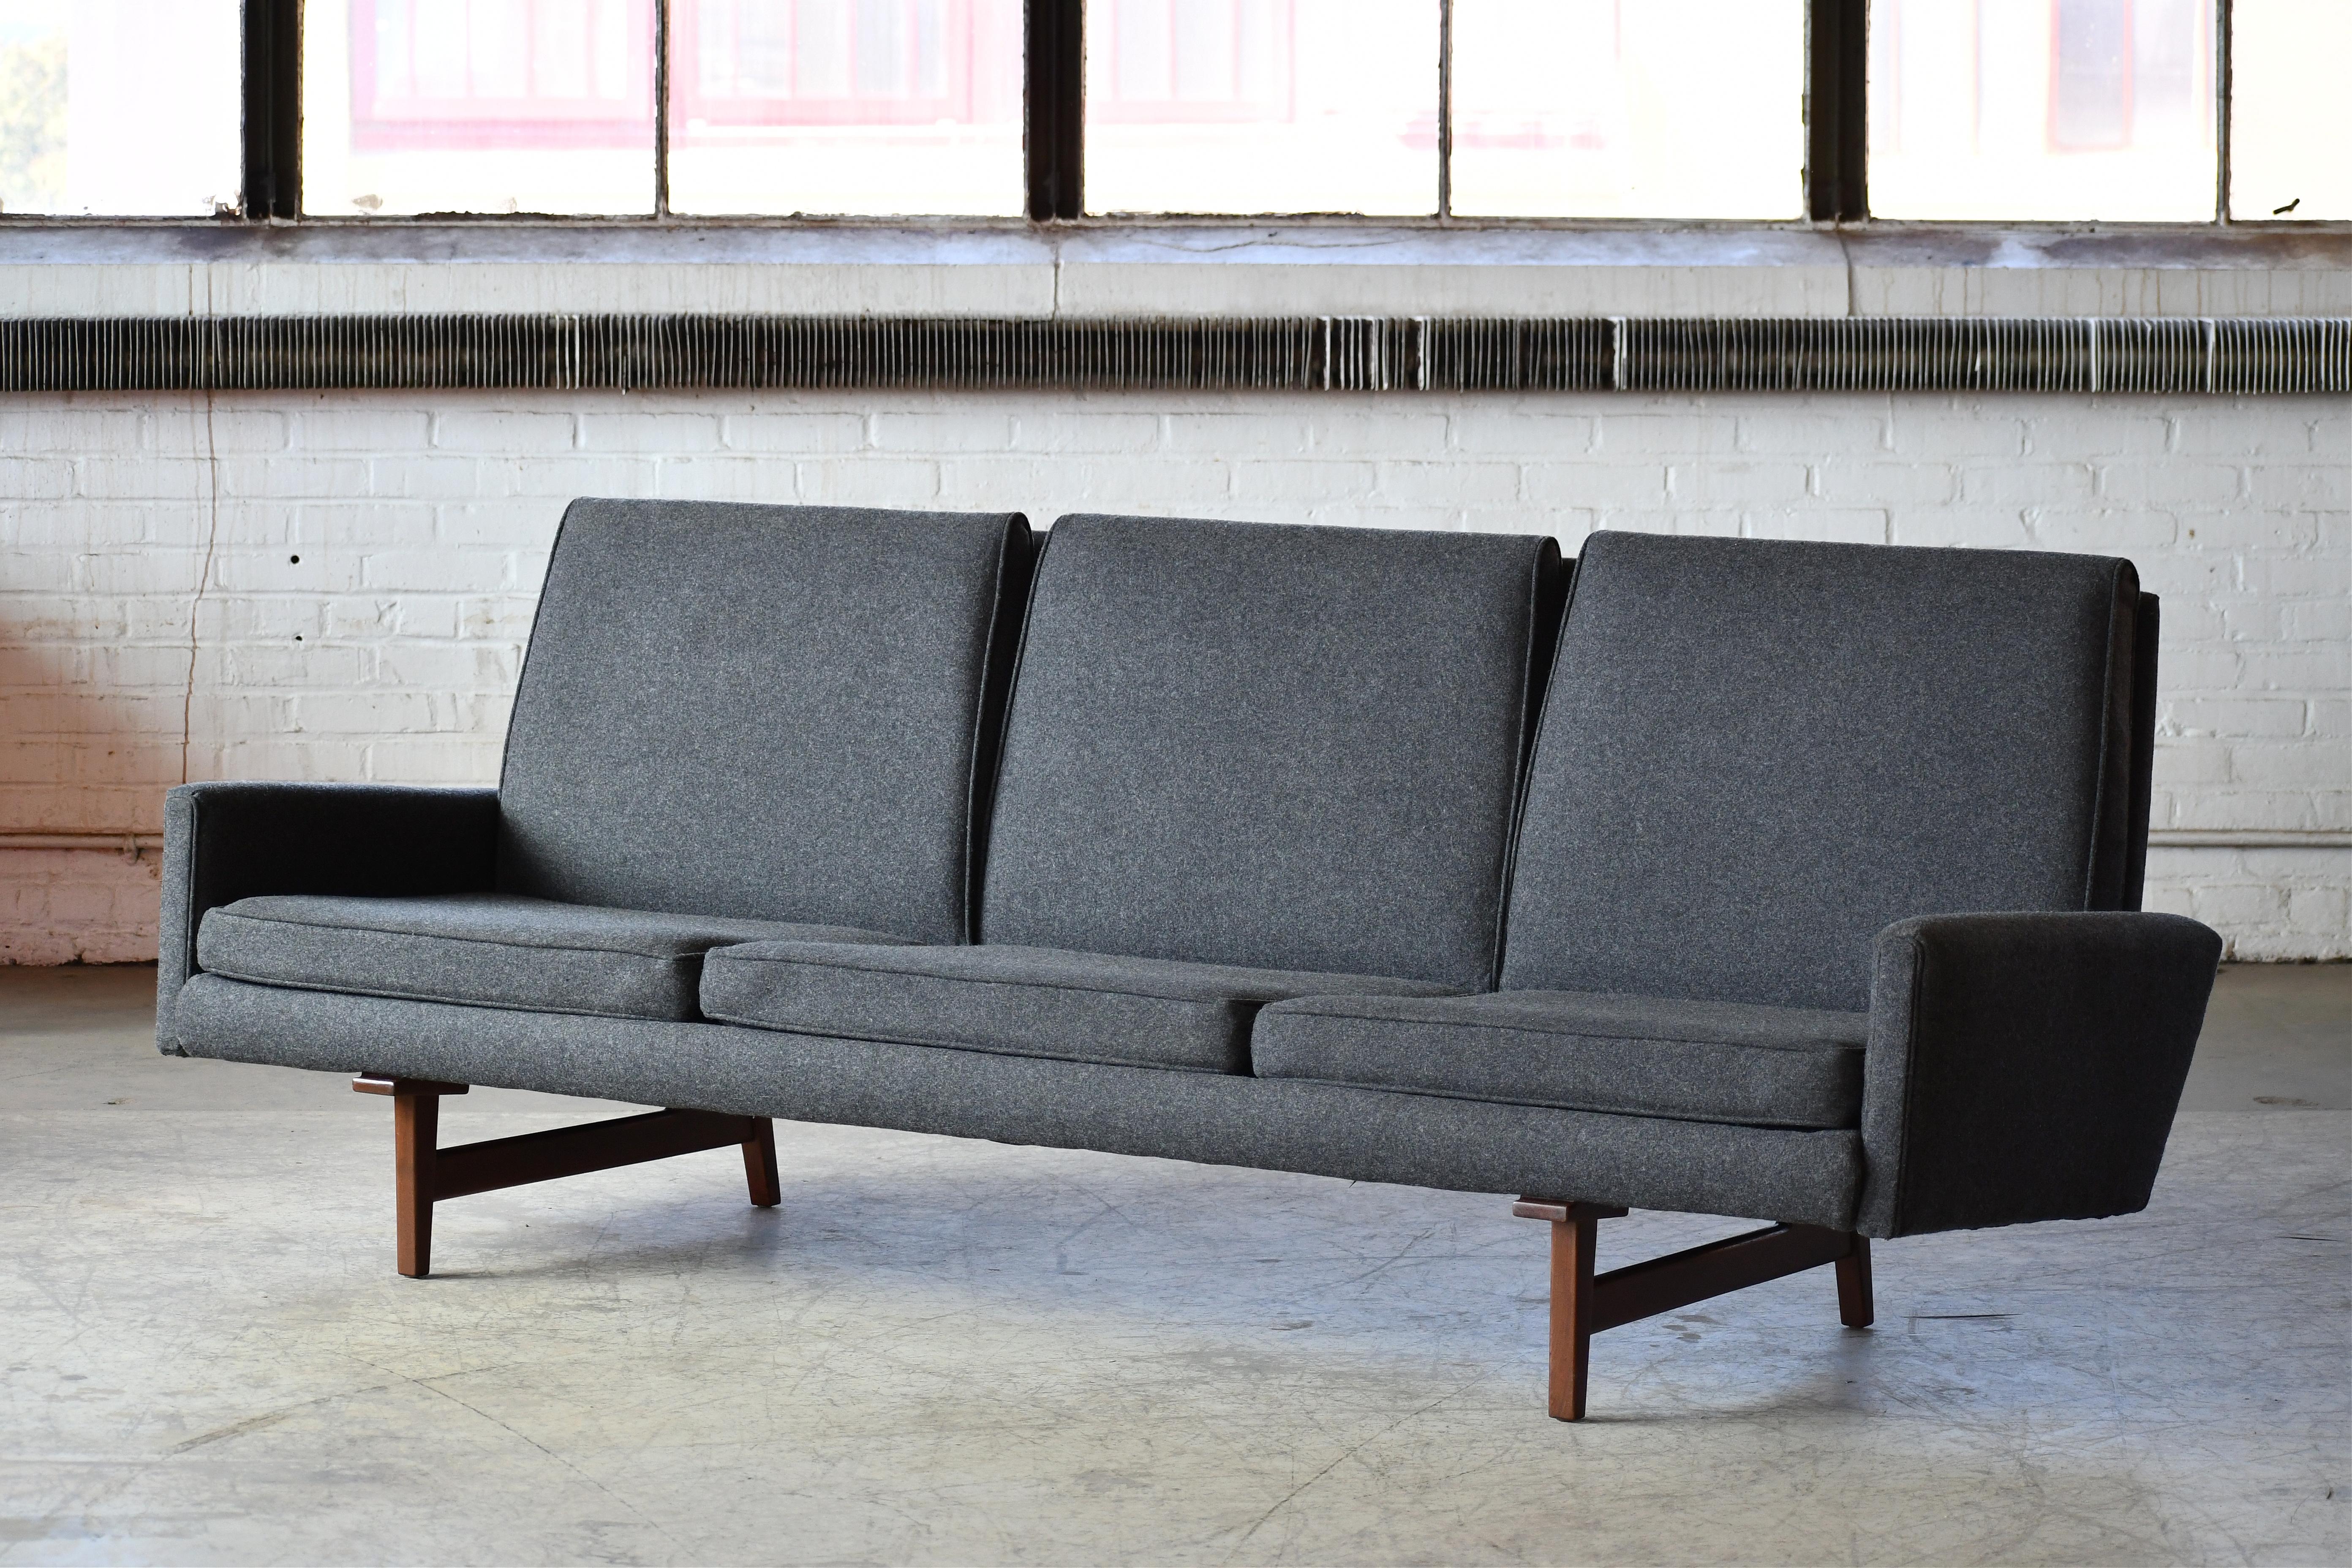 Classic mid-century three-seat sofa by one of the Grand Masters of the era, Jens Risom. Newly upholstered an a charcoal grey wool. Low profile cushions add to the sleek elegant look. Very high design build quality and overall in excellent condition.